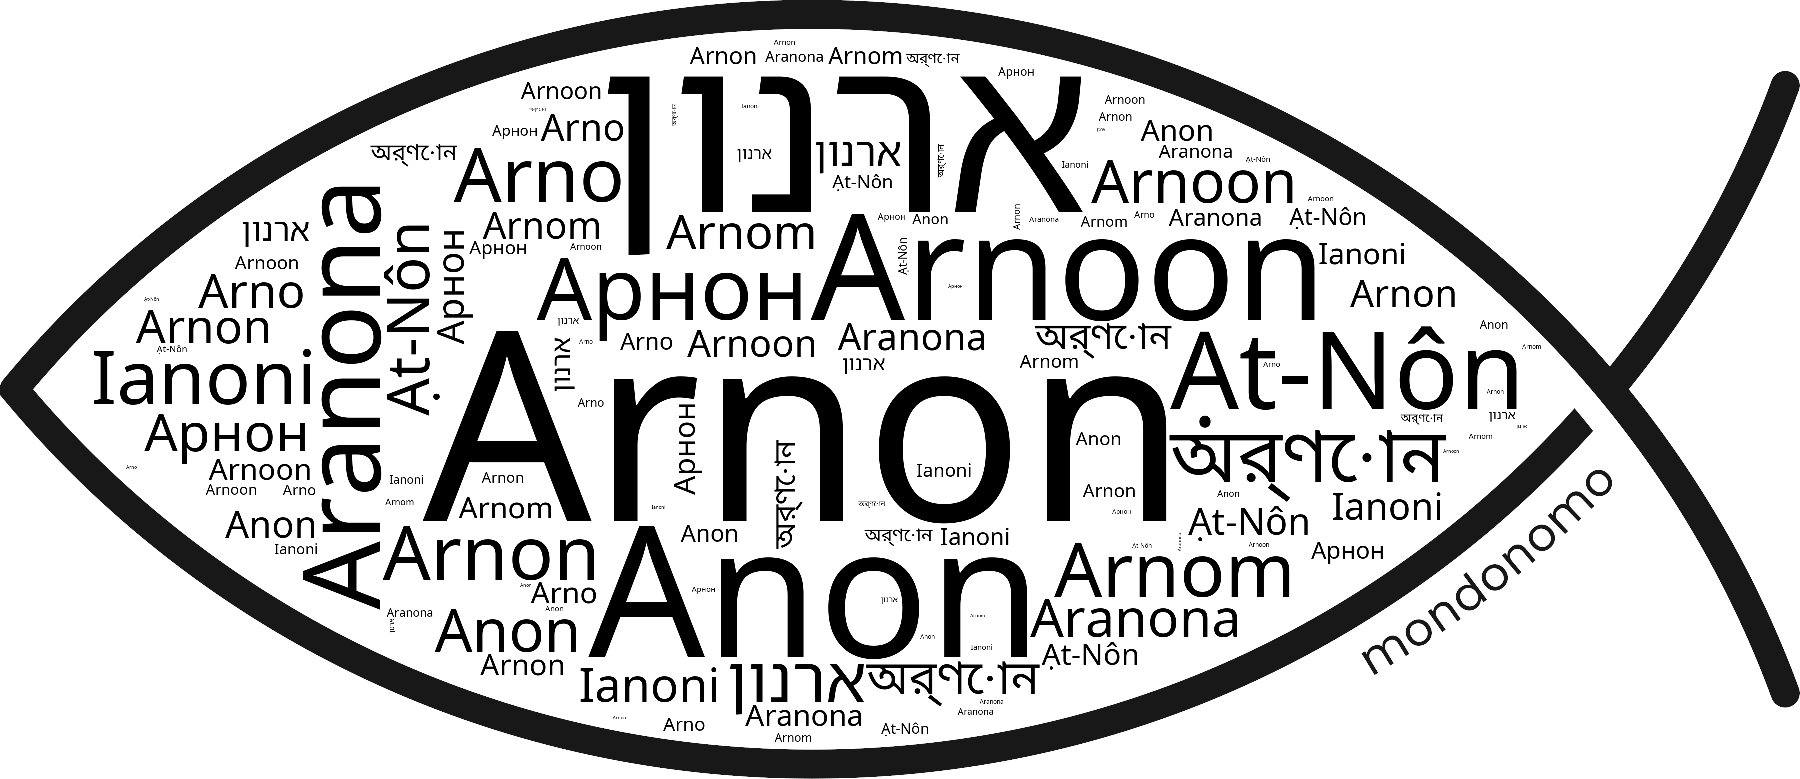 Name Arnon in the world's Bibles